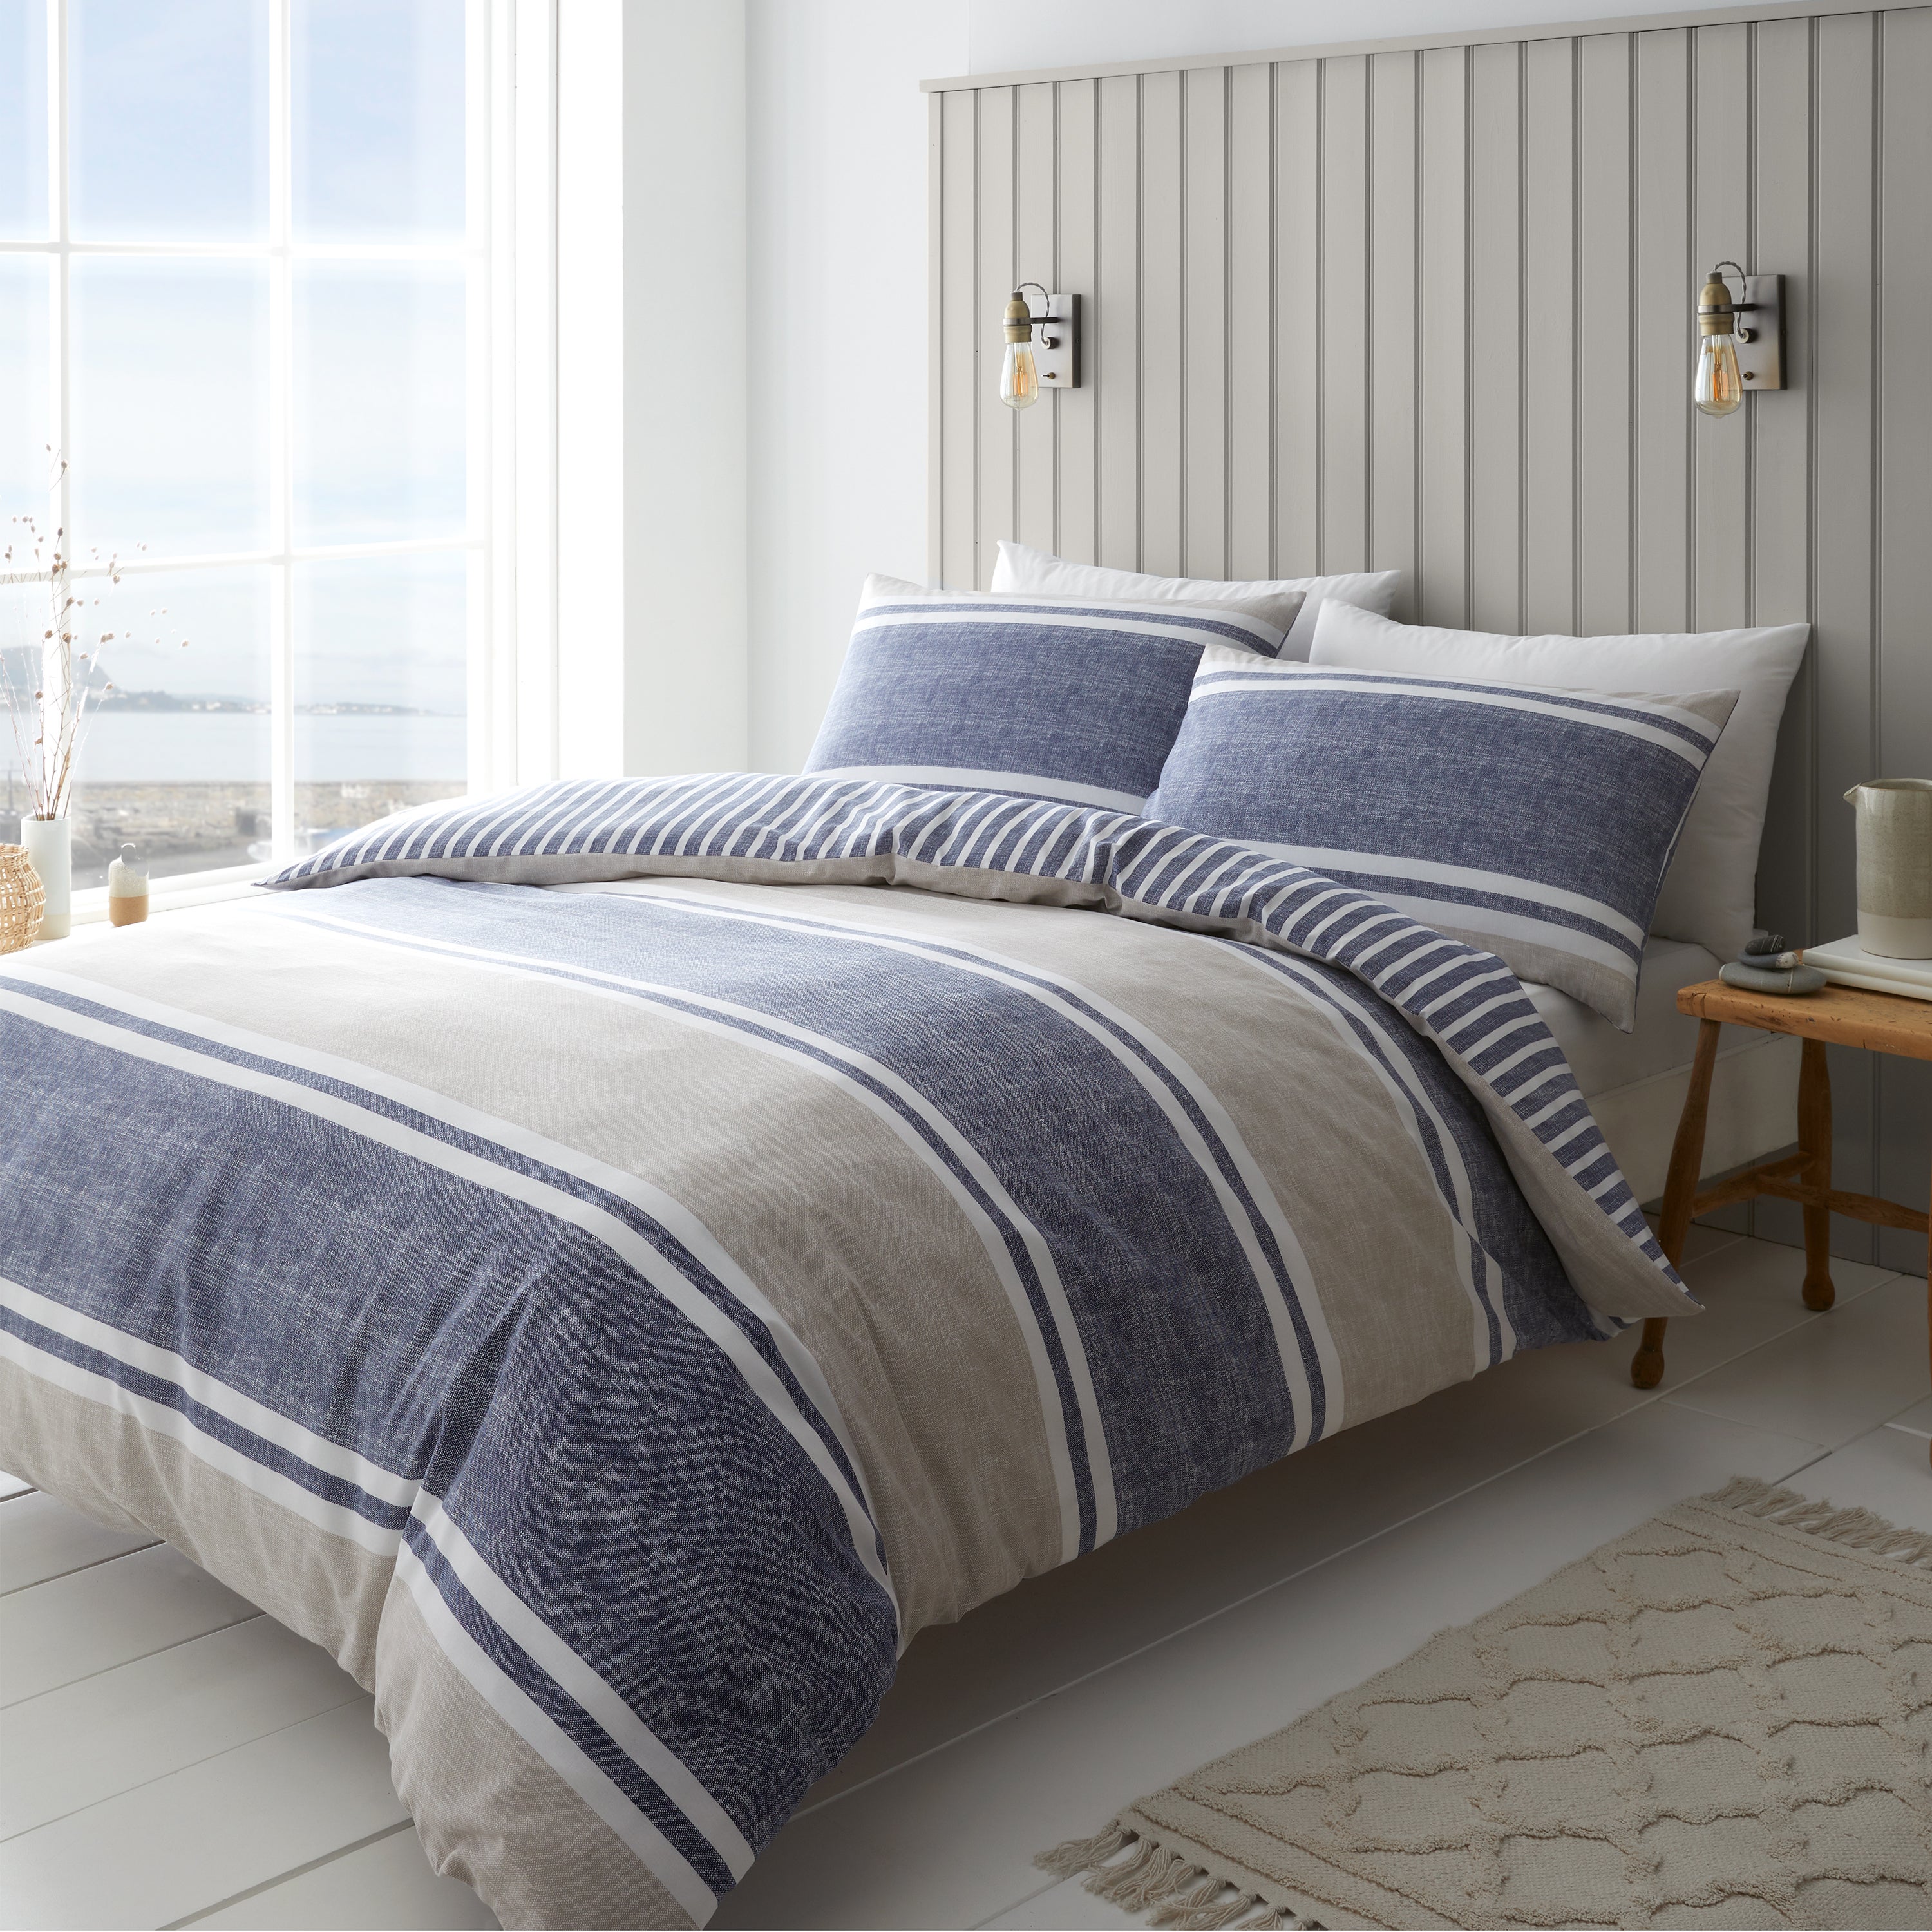 Photos - Bed Linen Catherine Lansfield Textured Banded Stripe Reversible Blue Duvet Cover & P 